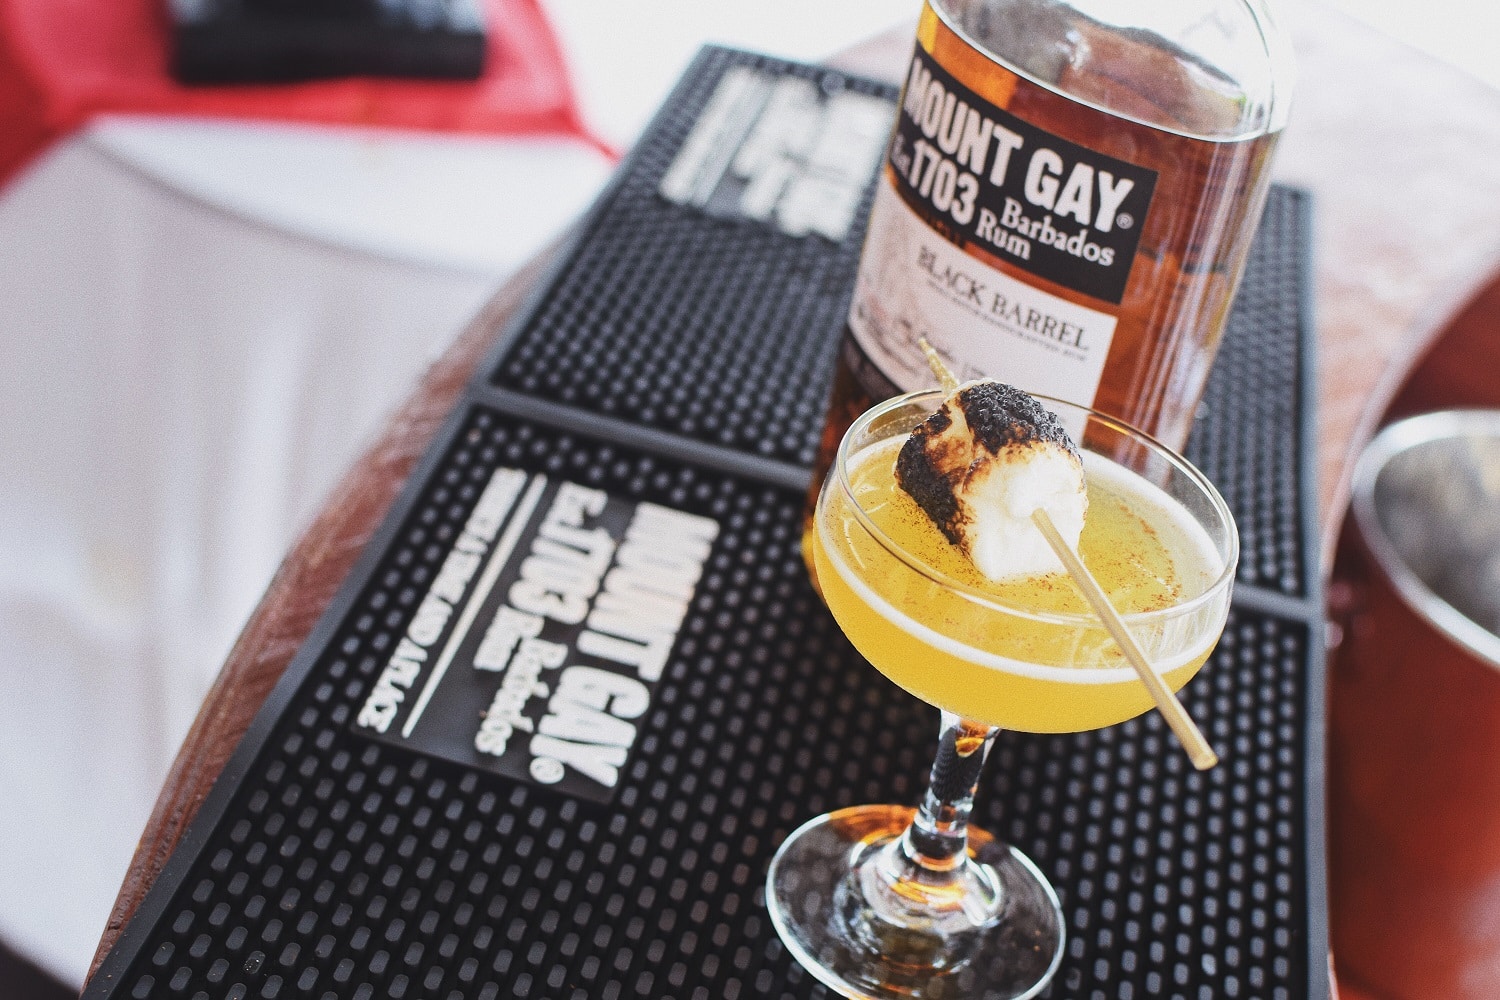 A craft cocktail topped with a seared marshmallow next to a bottle of Mount Gay rum